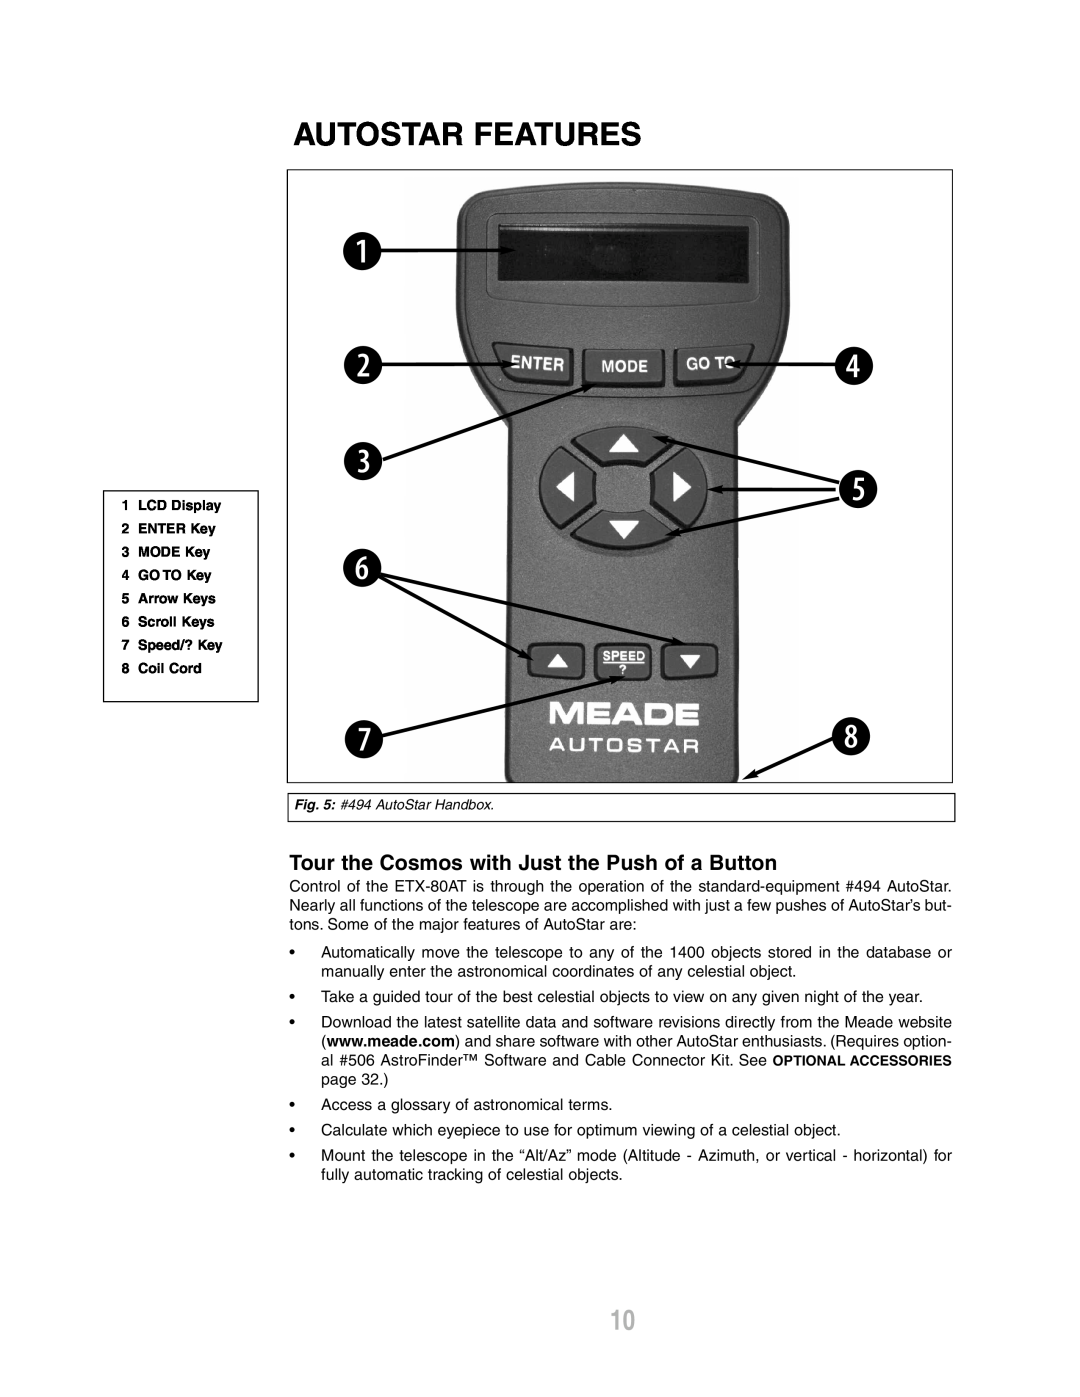 Meade ETX-80AT-TC instruction manual Autostar Features, Tour the Cosmos with Just the Push of a Button 